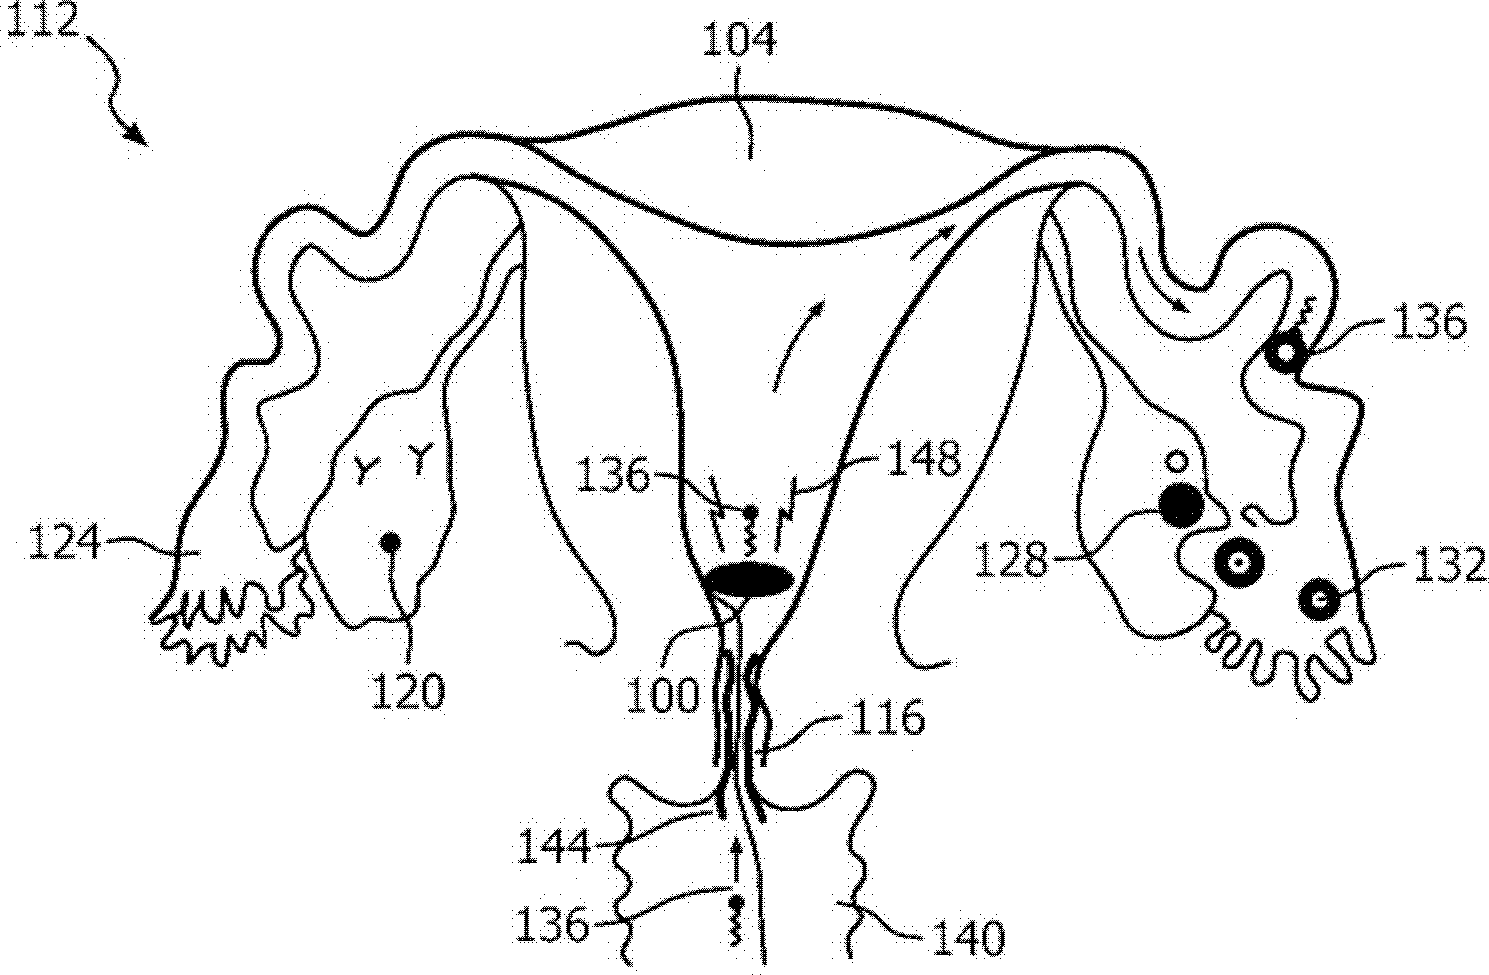 Intrauterine electronic capsule for administering a substance